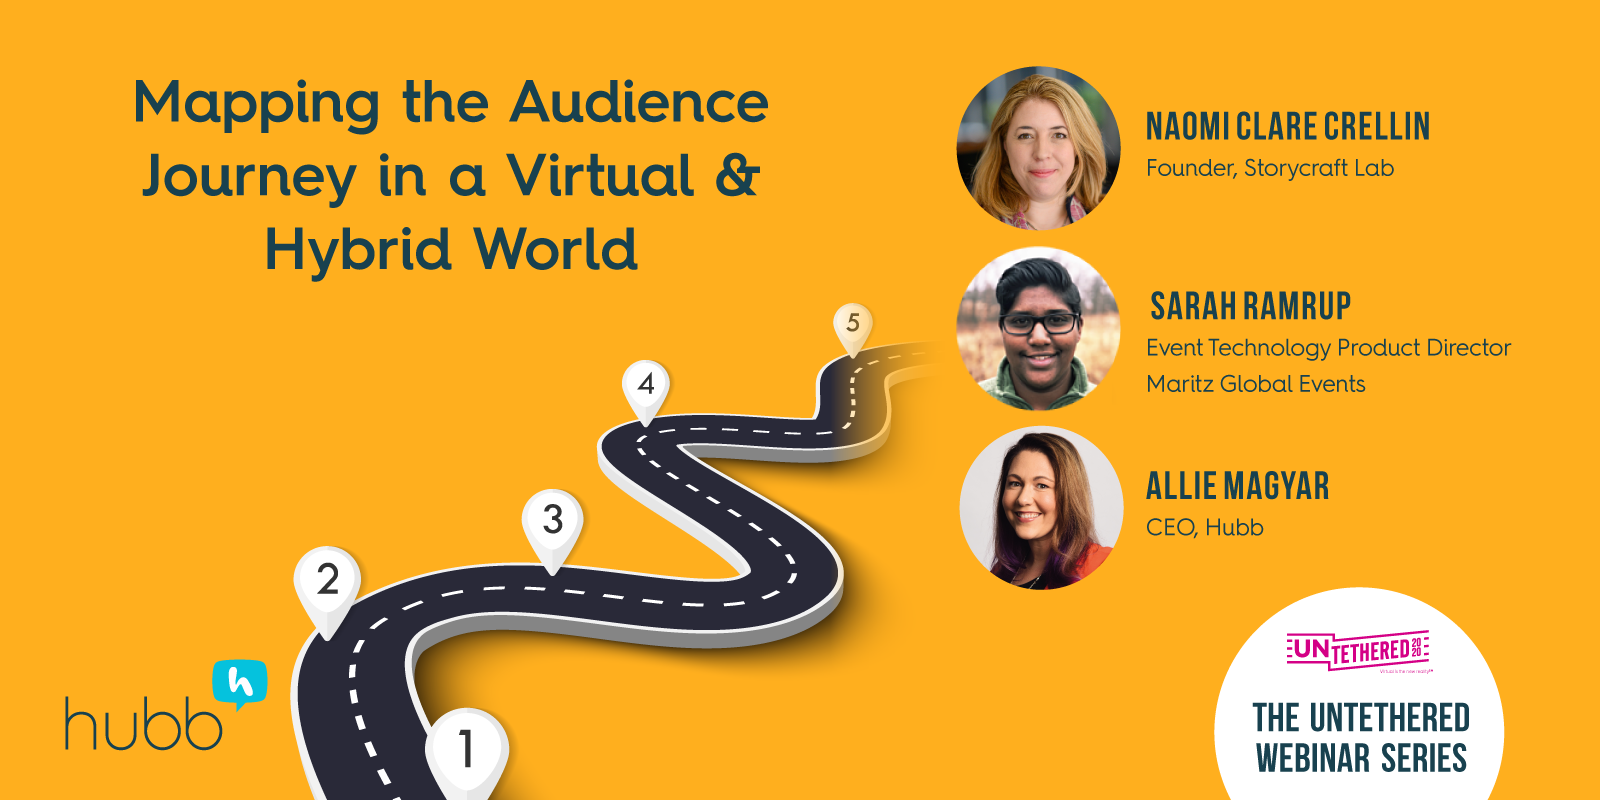 Mapping the Audience Journey in a Virtual & Hybrid World Webinar